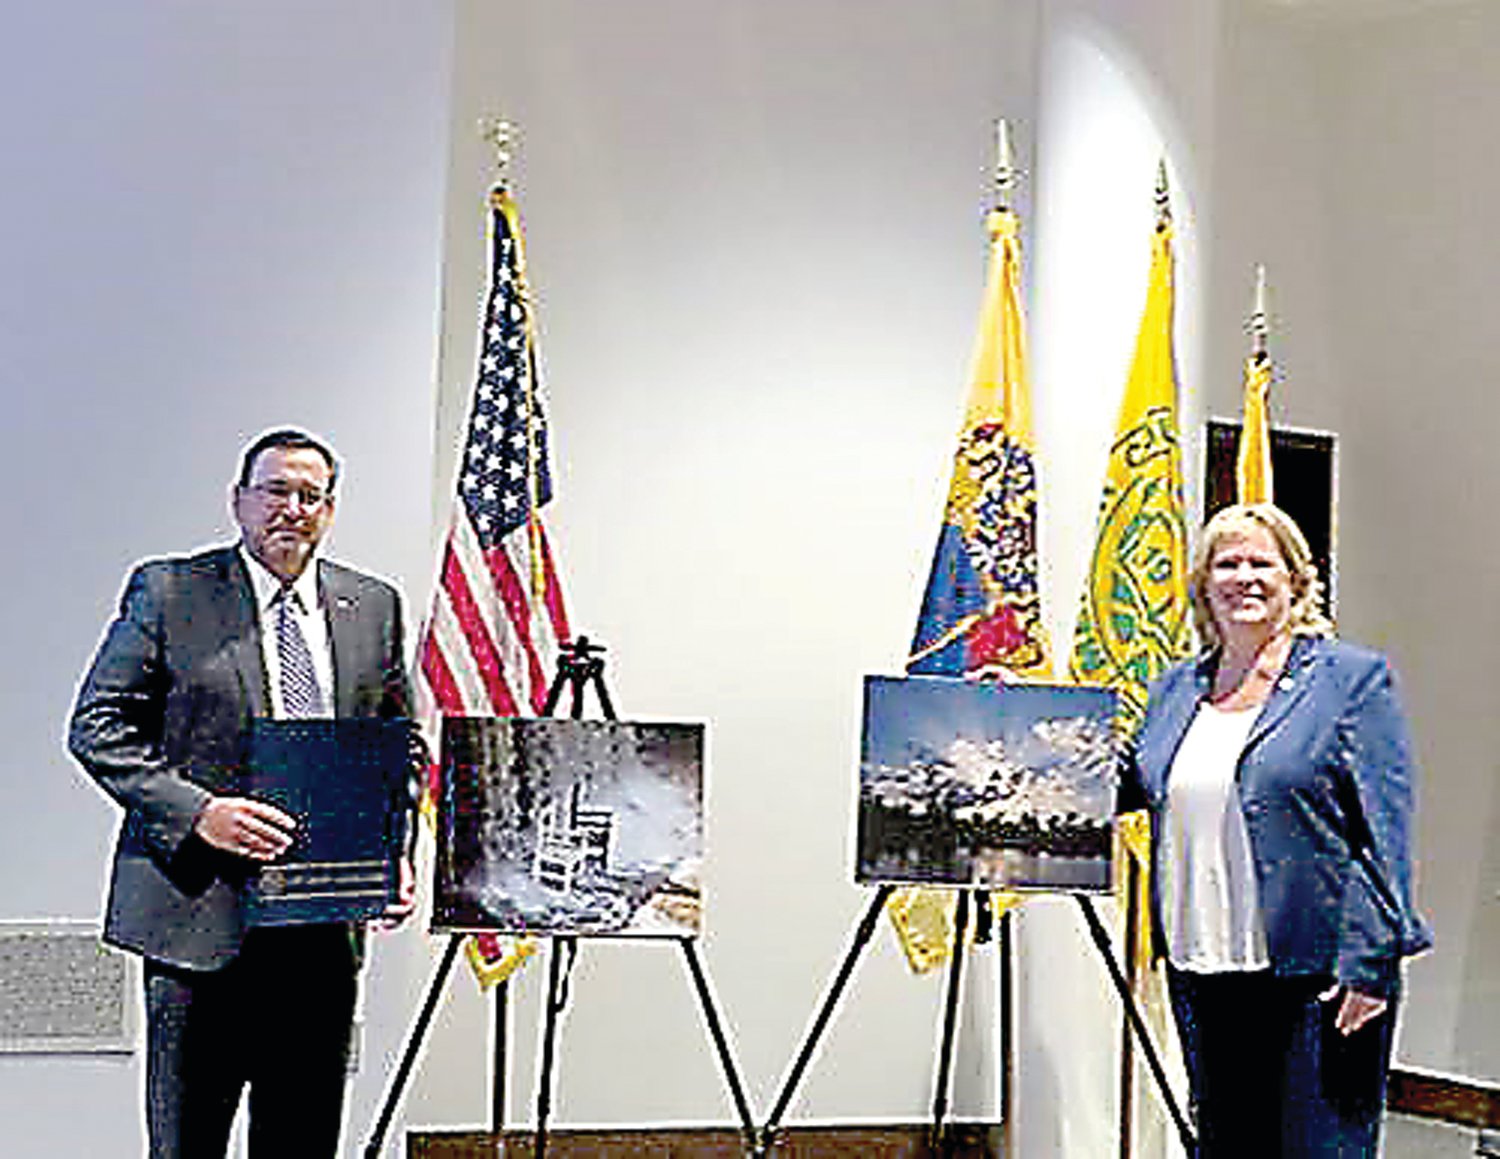 DRBC Executive Director Steve Tambini and Assemblywoman Carol Murphy (NJ-7) pose with the winning photos at DRBC’s meeting, held Sept. 11, at The Conference Center at Mercer, West Windsor, N.J.